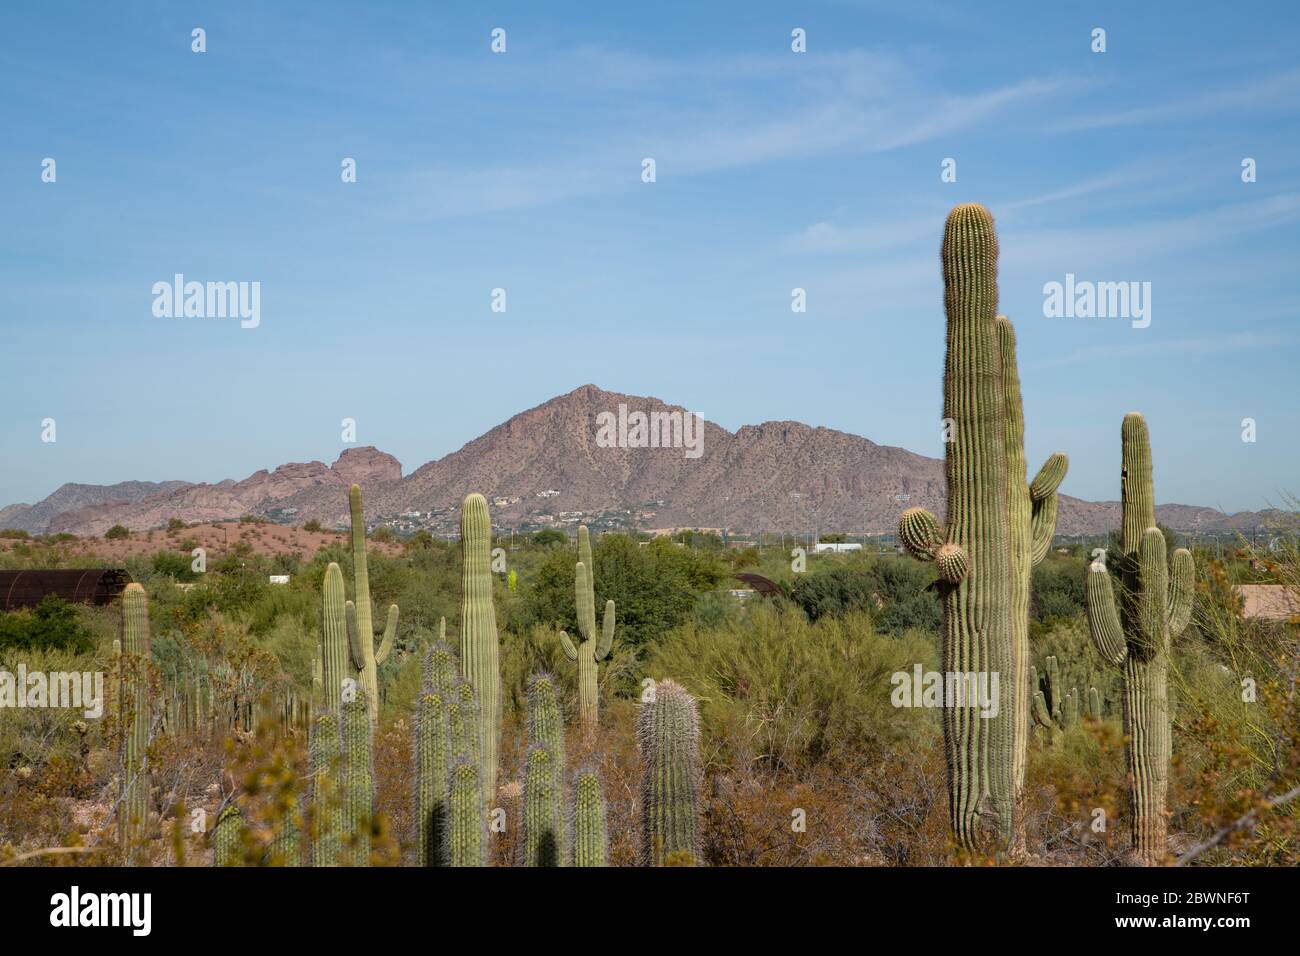 Desert vegetation in the Phoenix Arizona area with Camelback Mountain in the distance Stock Photo